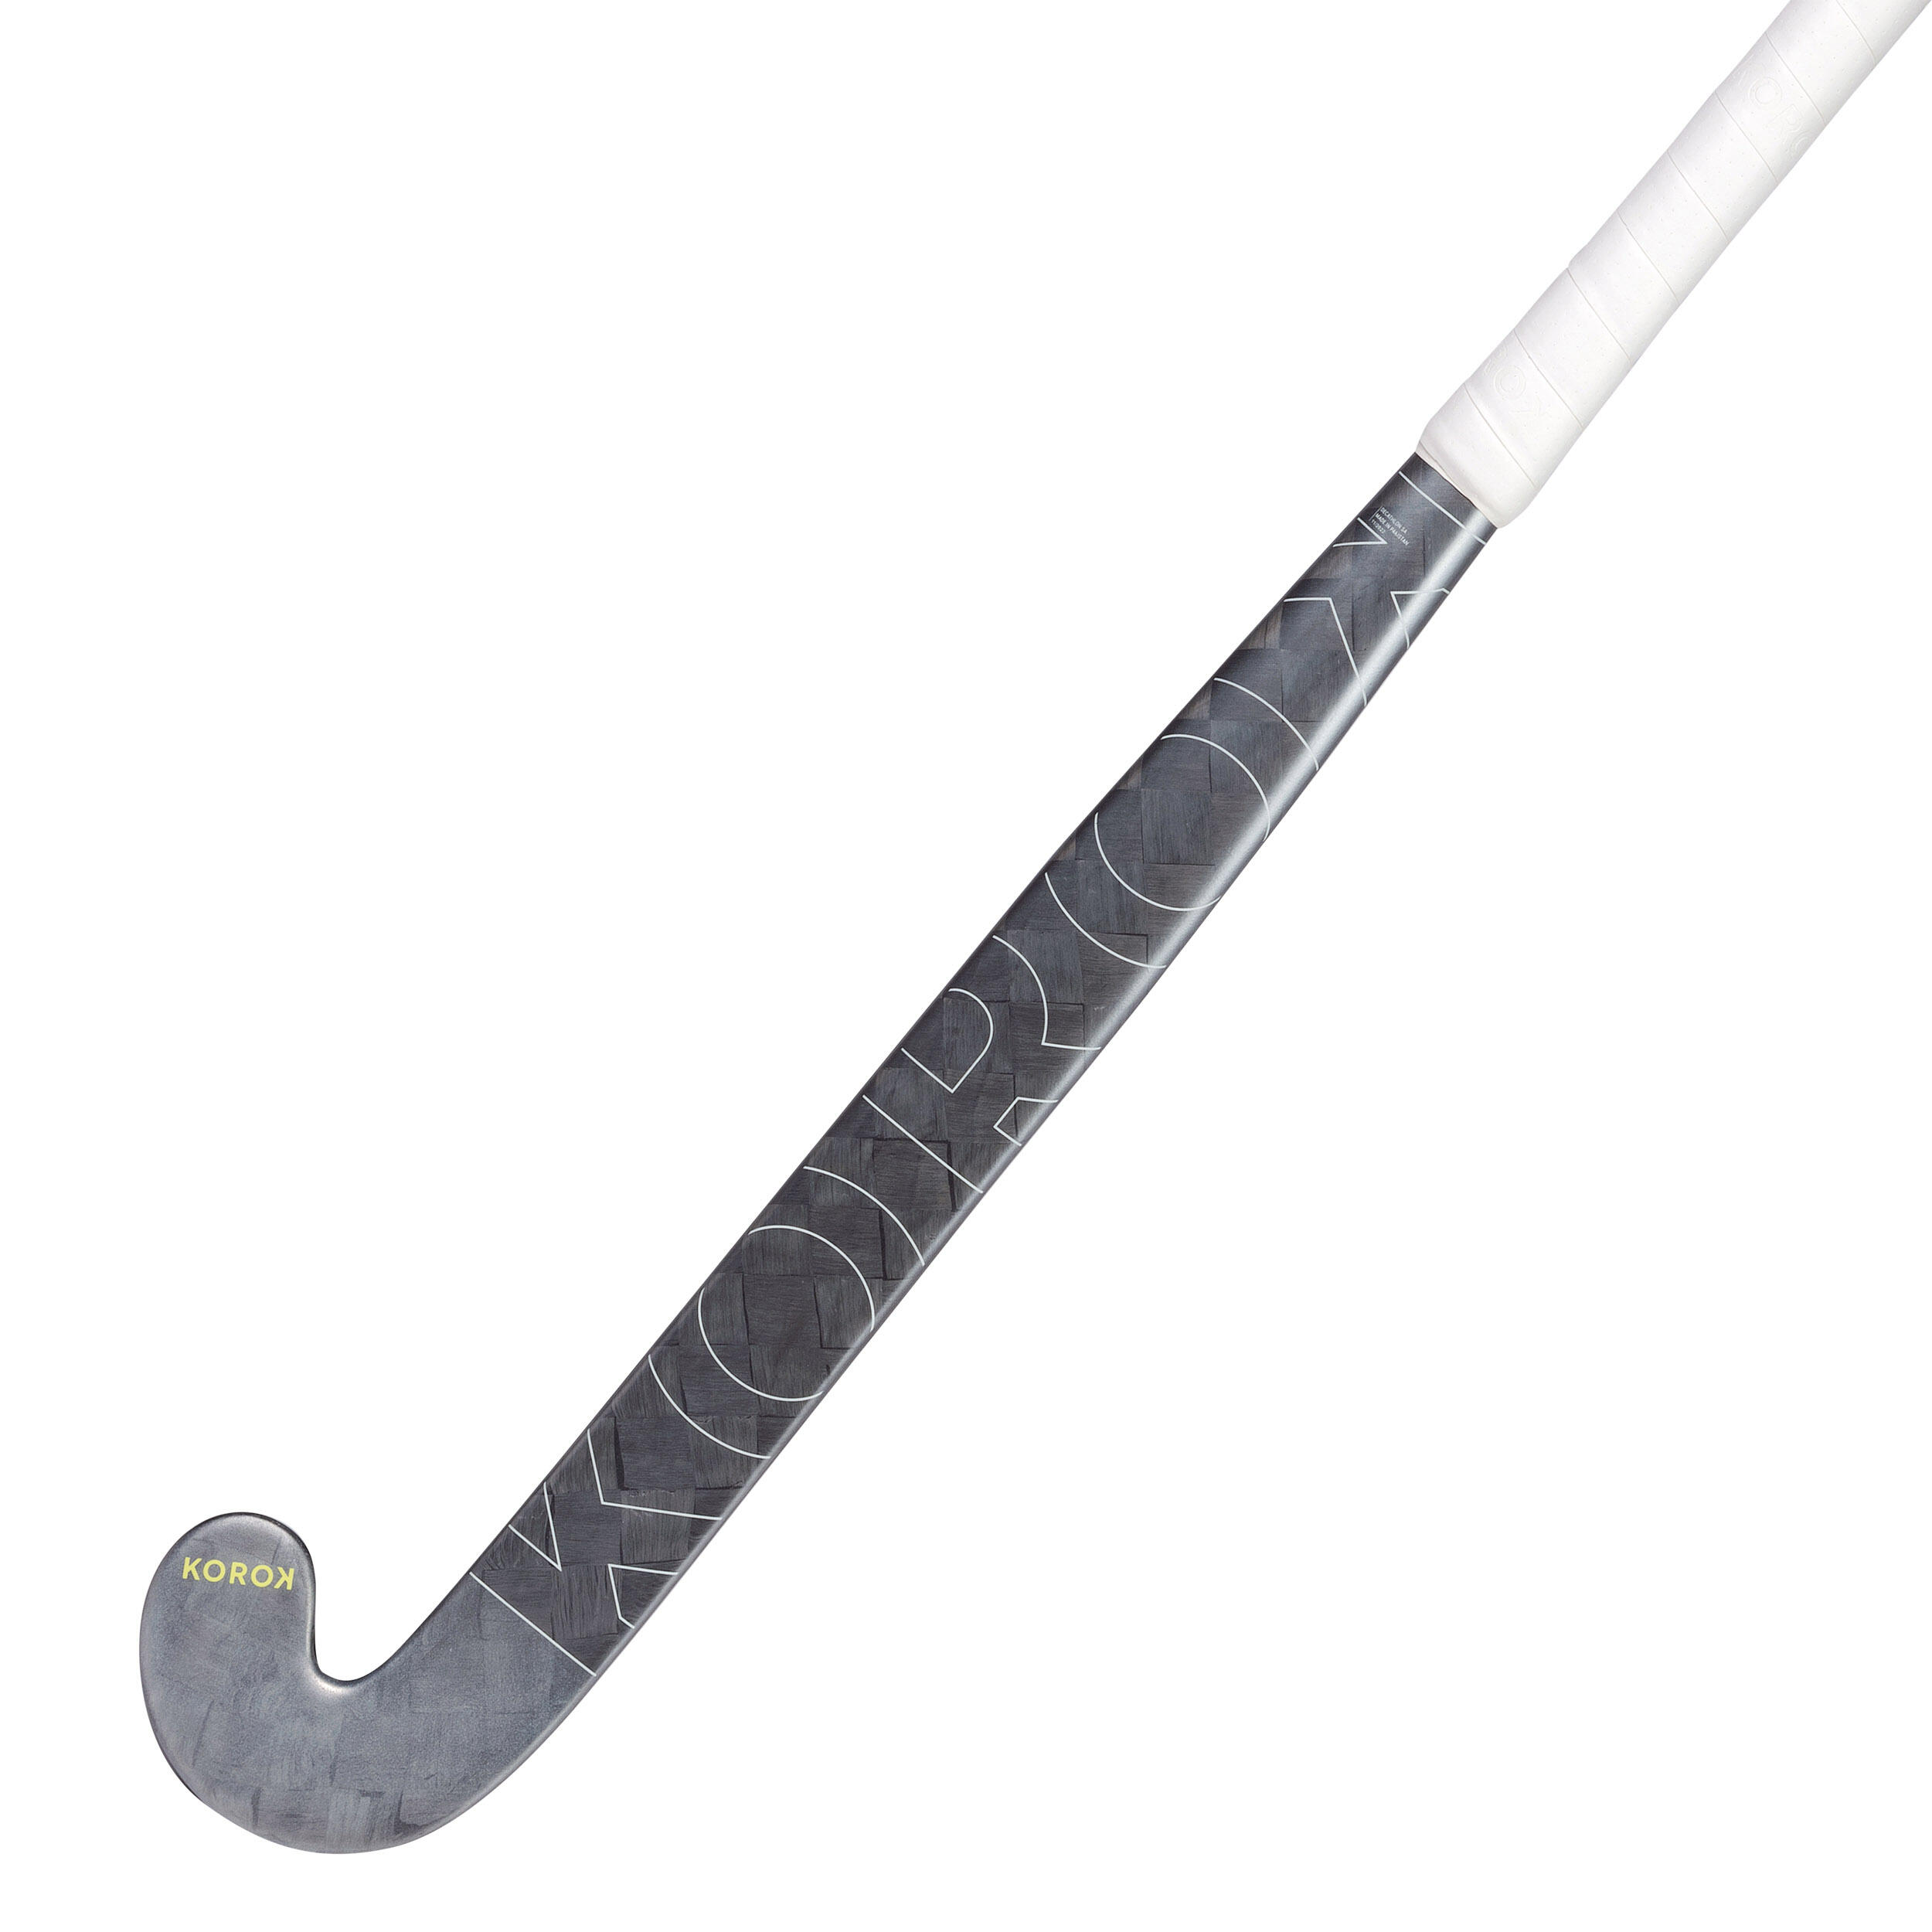 Adult Advanced 95% Carbon Extra Low Bow Field Hockey Stick FH995 - Grey/Yellow 3/12